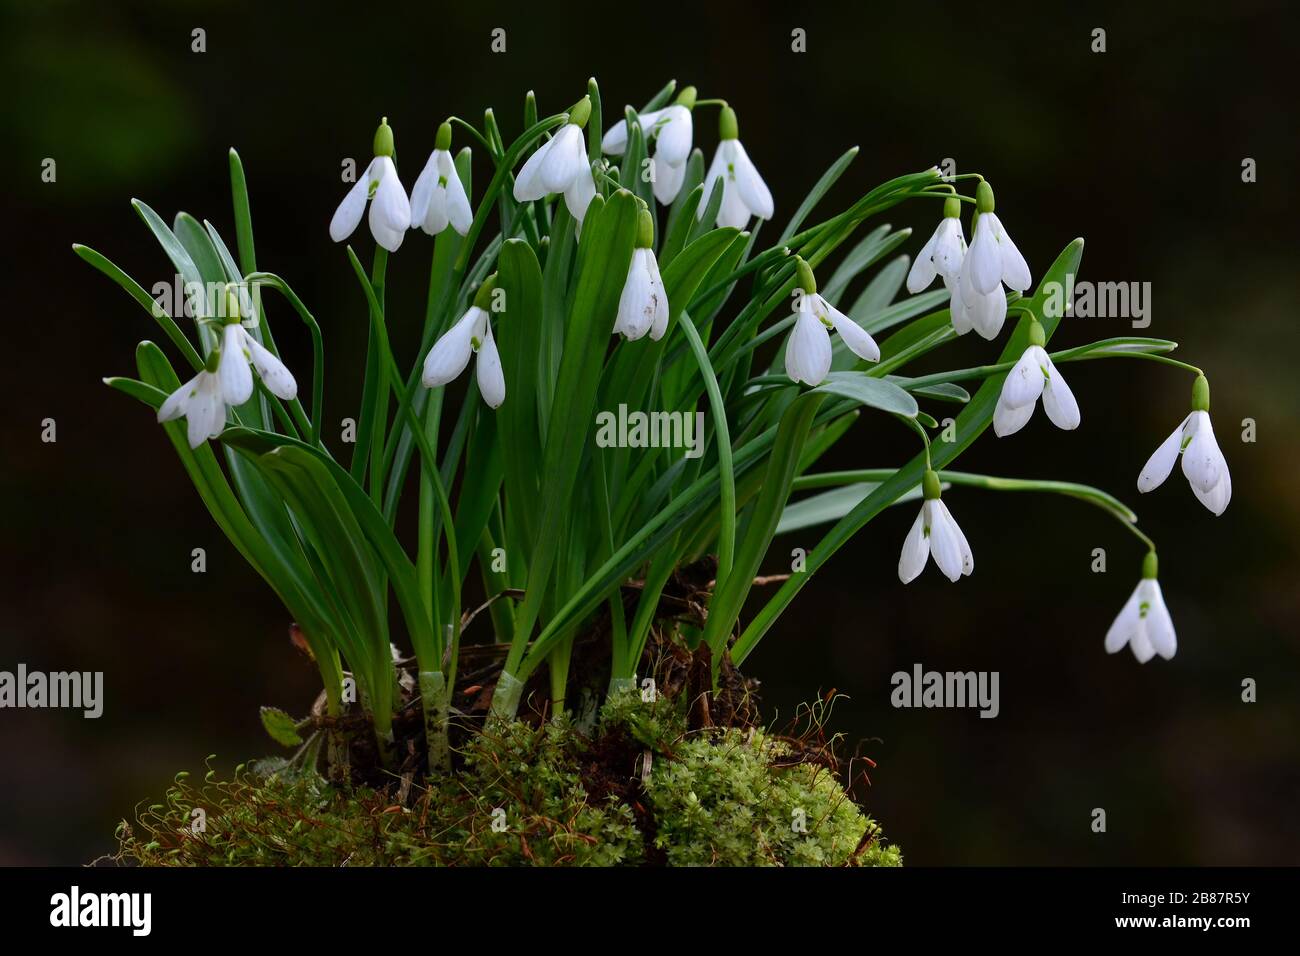 Cluster of early spring Snowdrops flowers in moss against dark background, close up view Stock Photo